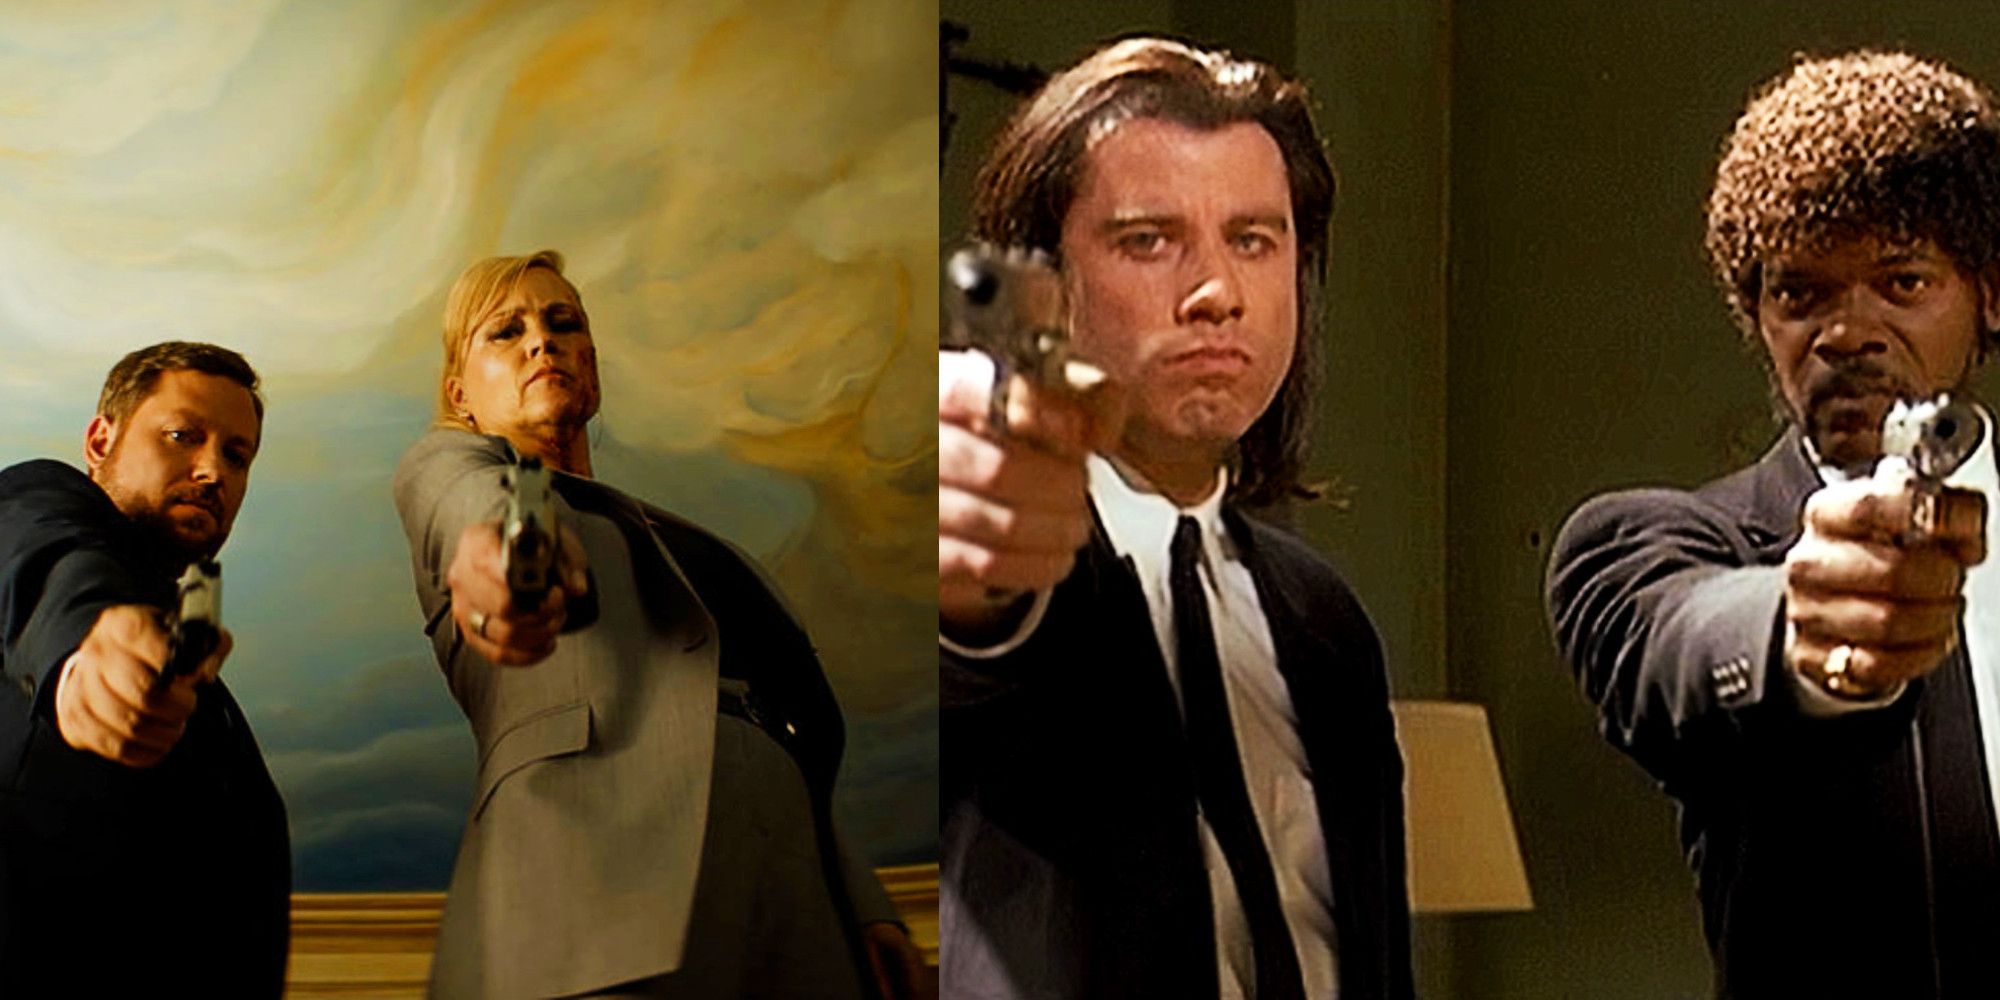 Alex Vincent as Andy Barclay and Christine Elise as Kyle in Chucky episode 6, John Travolta as Vincent Vega and Samuel L Jackson as Jules Winnfield in Pulp Fiction